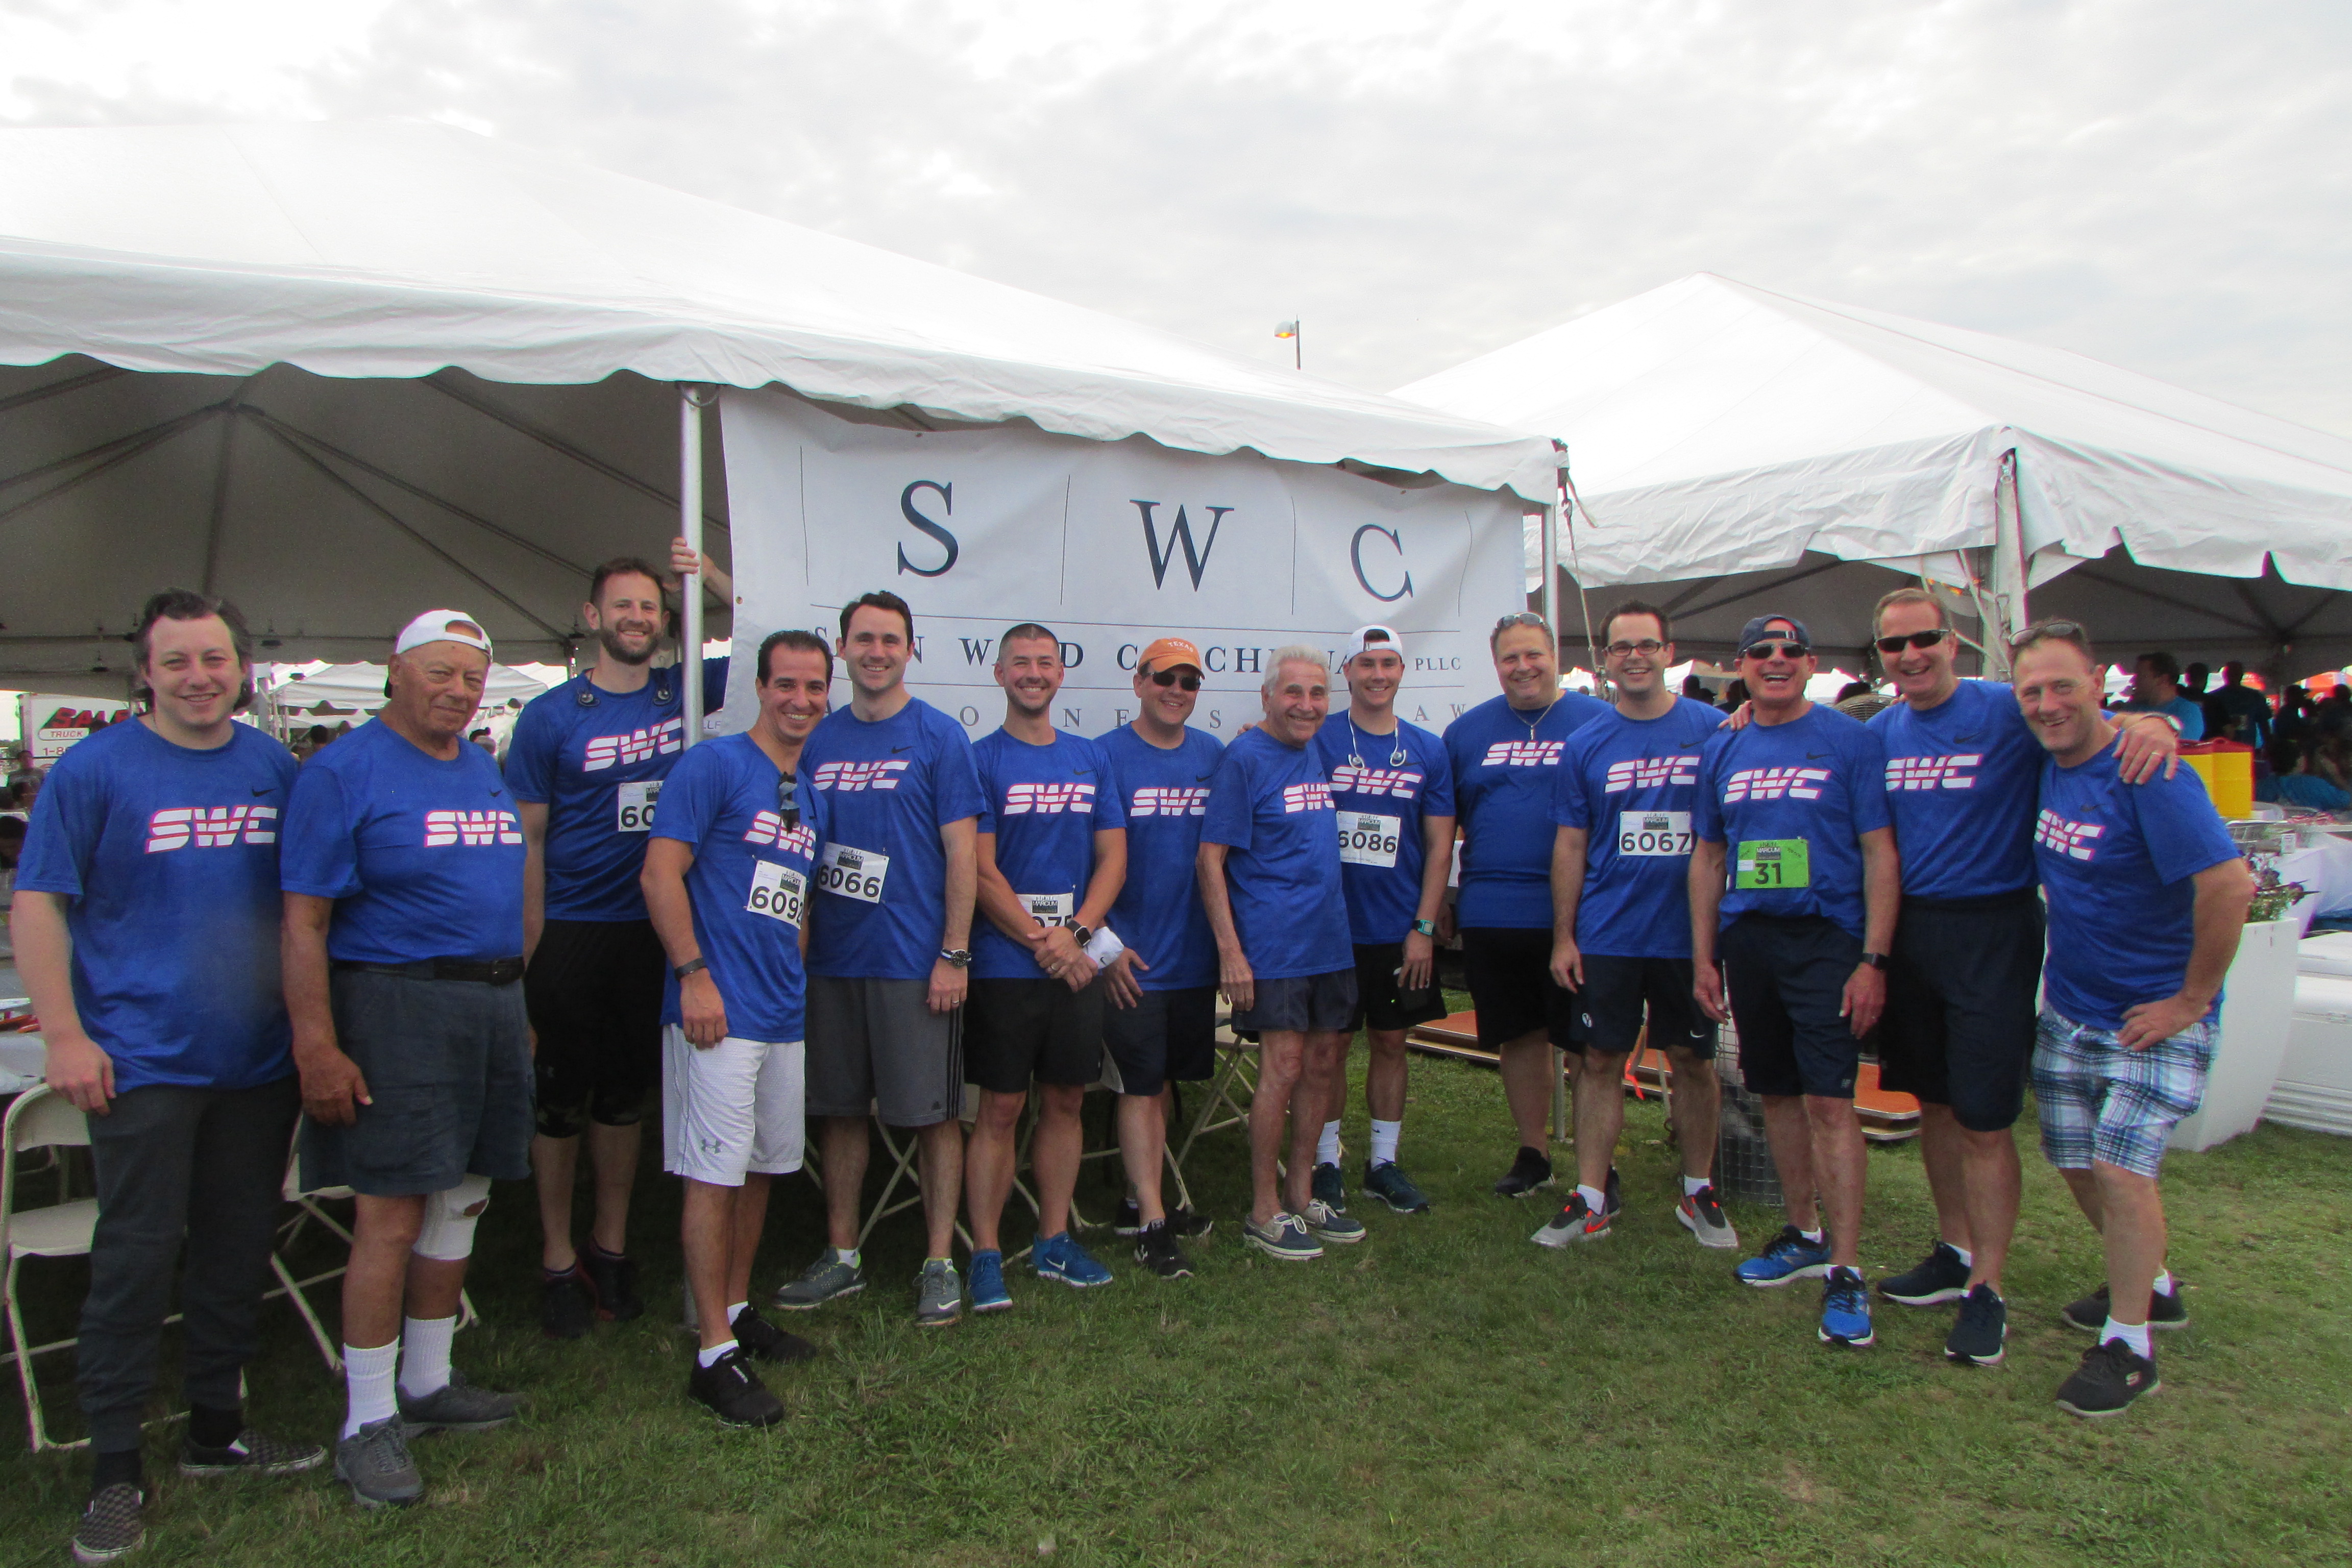 Attorneys and staff members from the Firm join together for a photo at the 2018 Marcum Workplace Challenge.